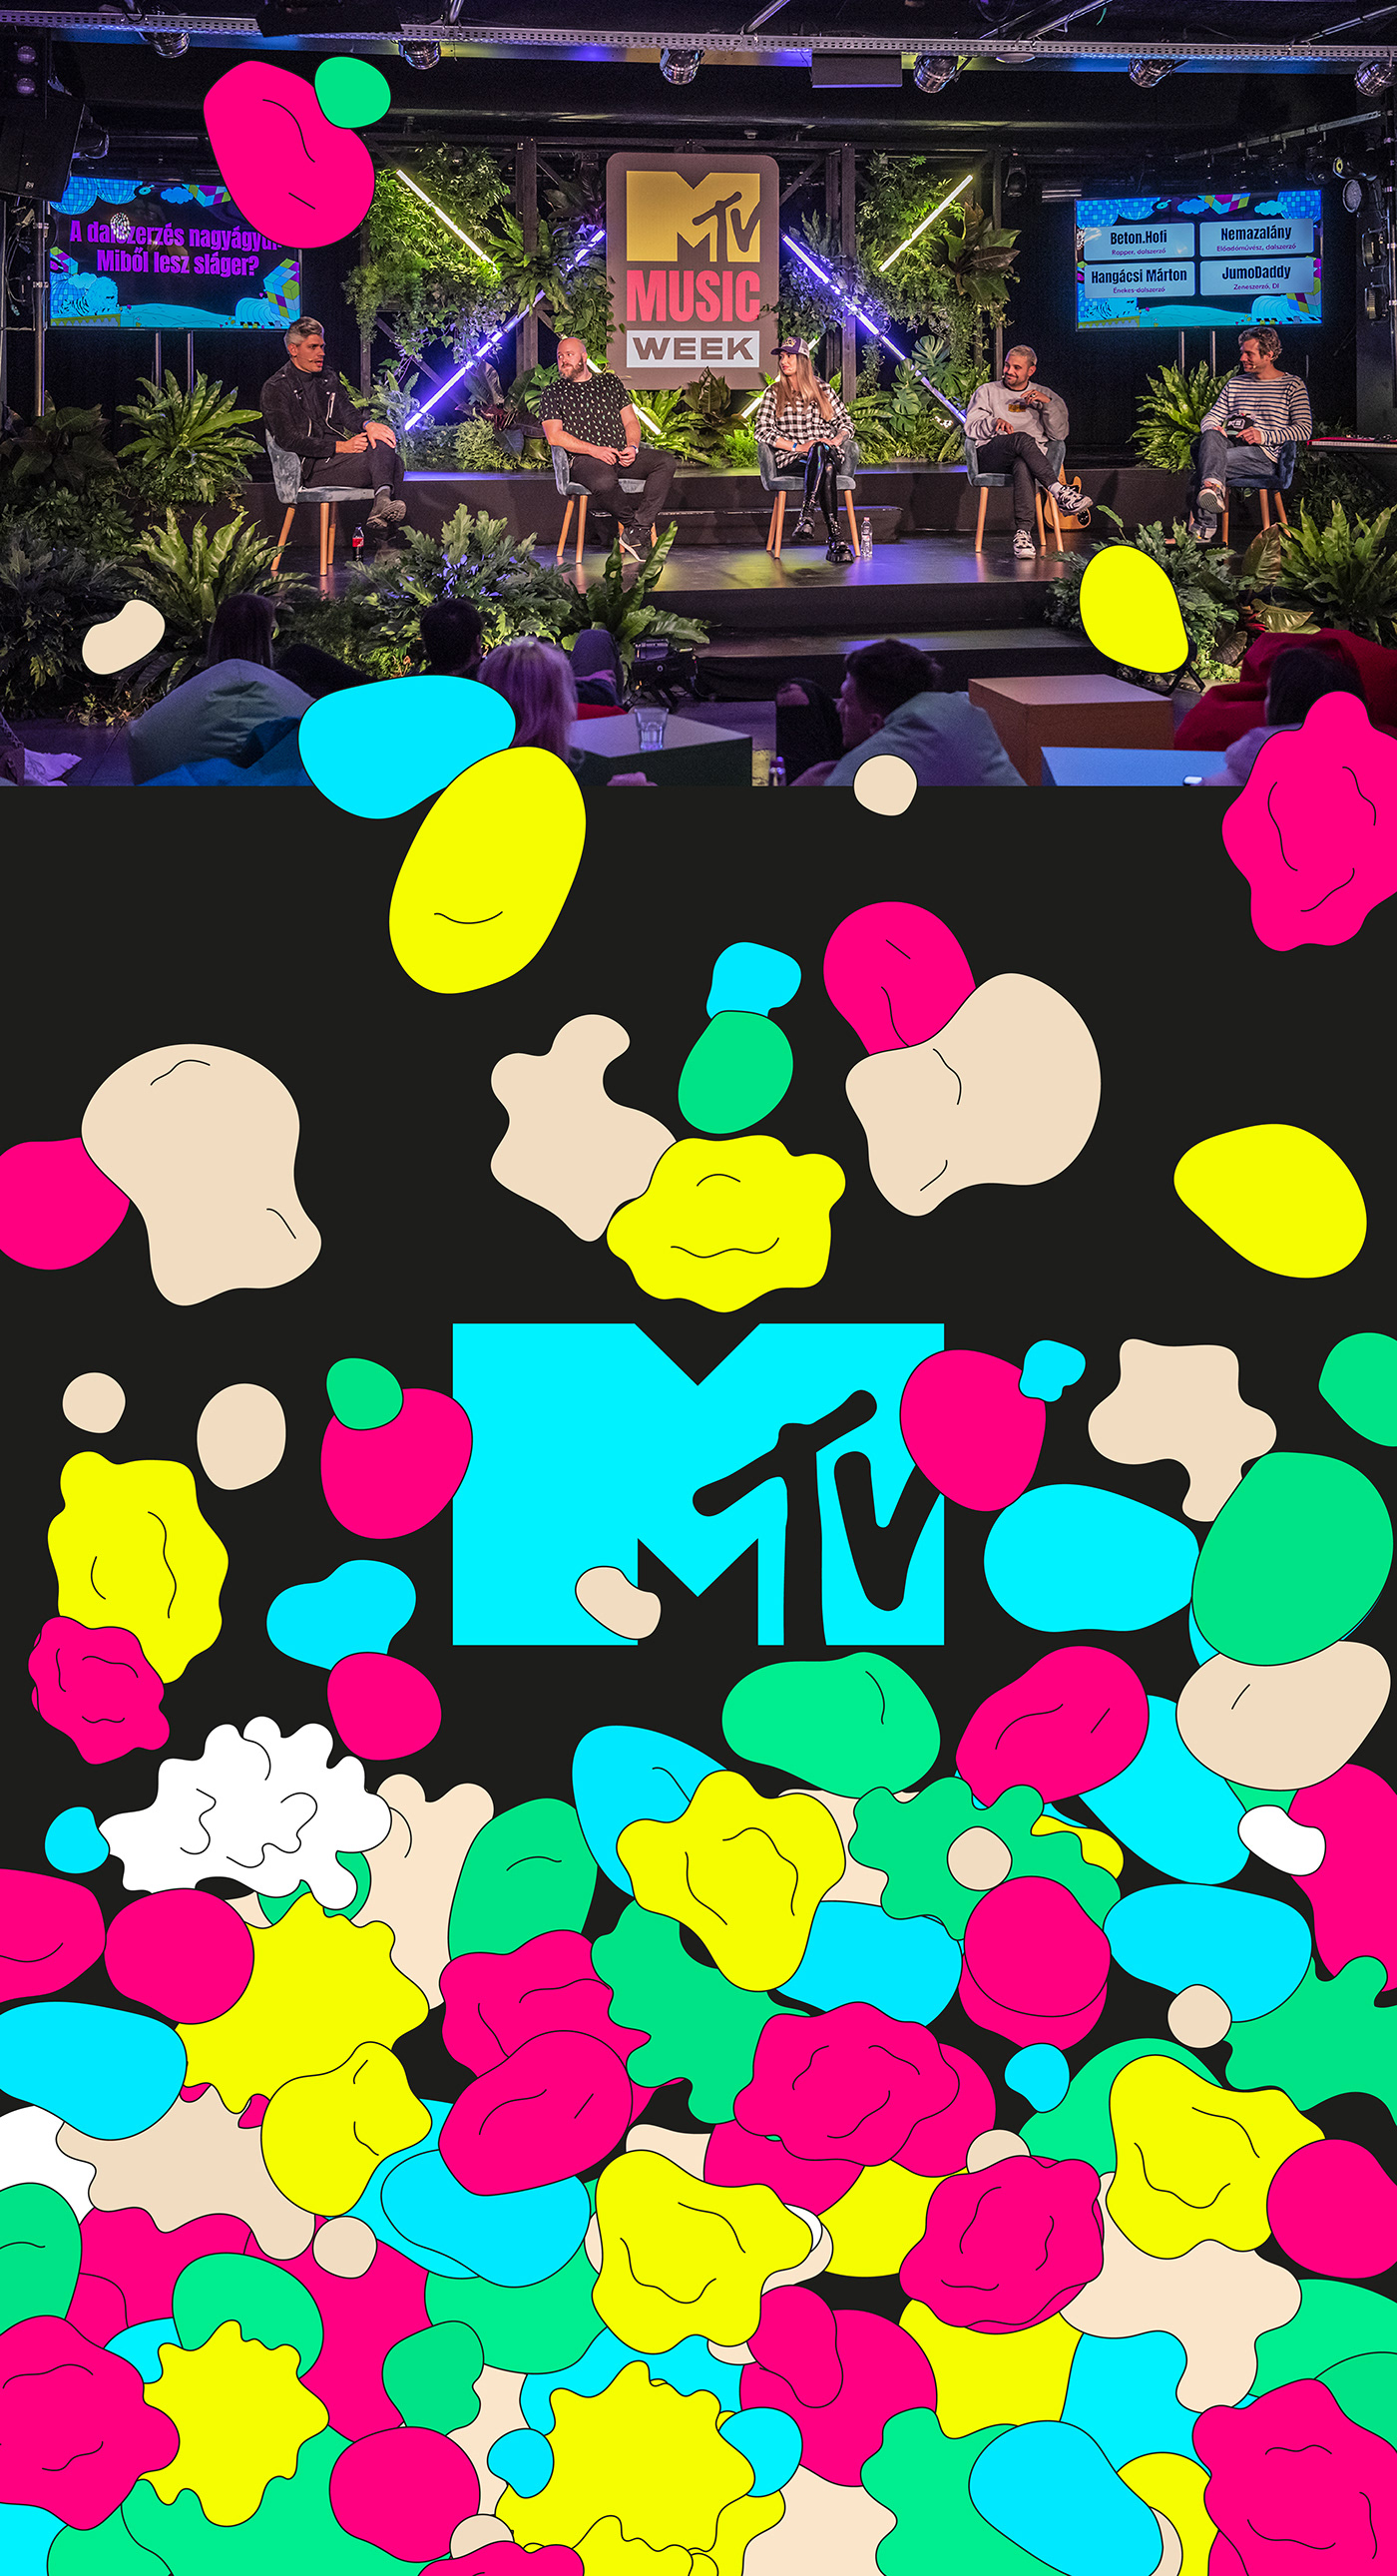 budapest colorful eclectic festival identity Mtv music party graphic design  ILLUSTRATION 